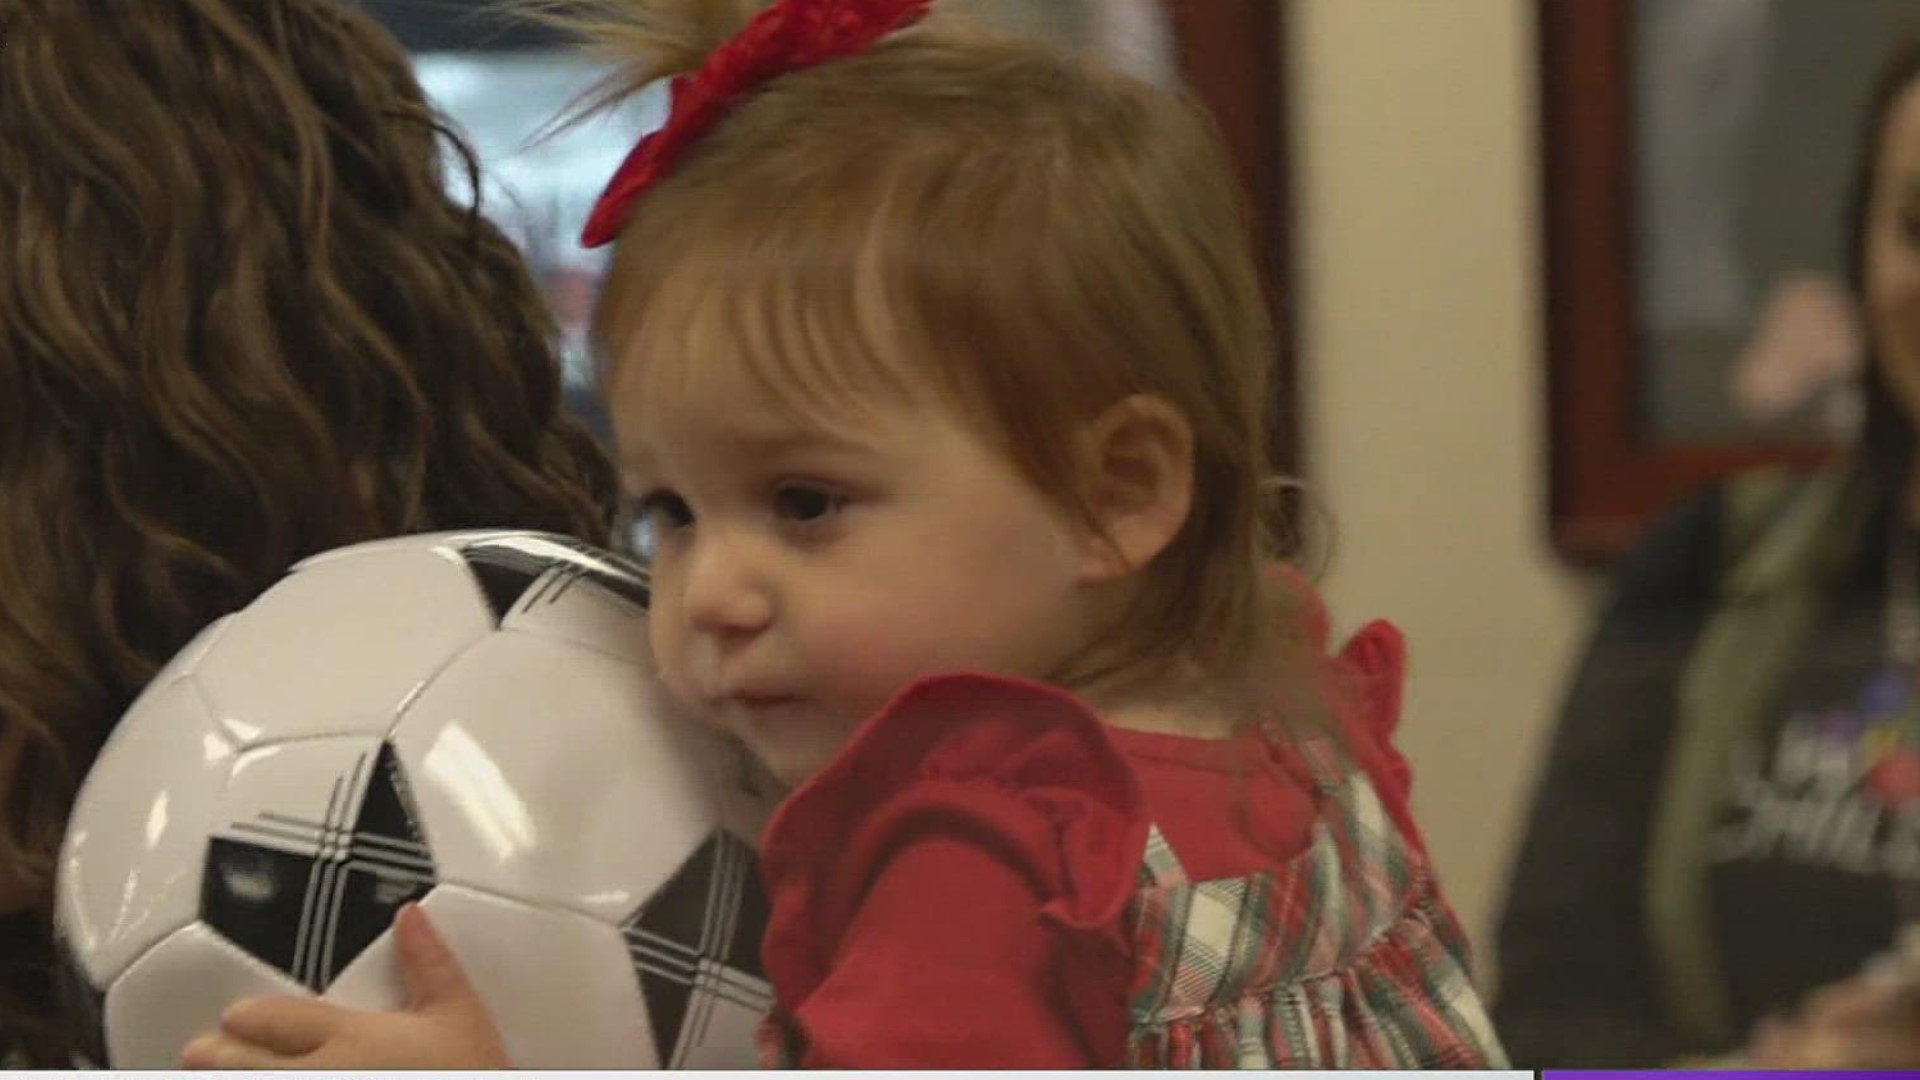 At the Nueces County Courthouse in Corpus Christi, 14 children found their forever homes as the country recognizes National Adoption Day.